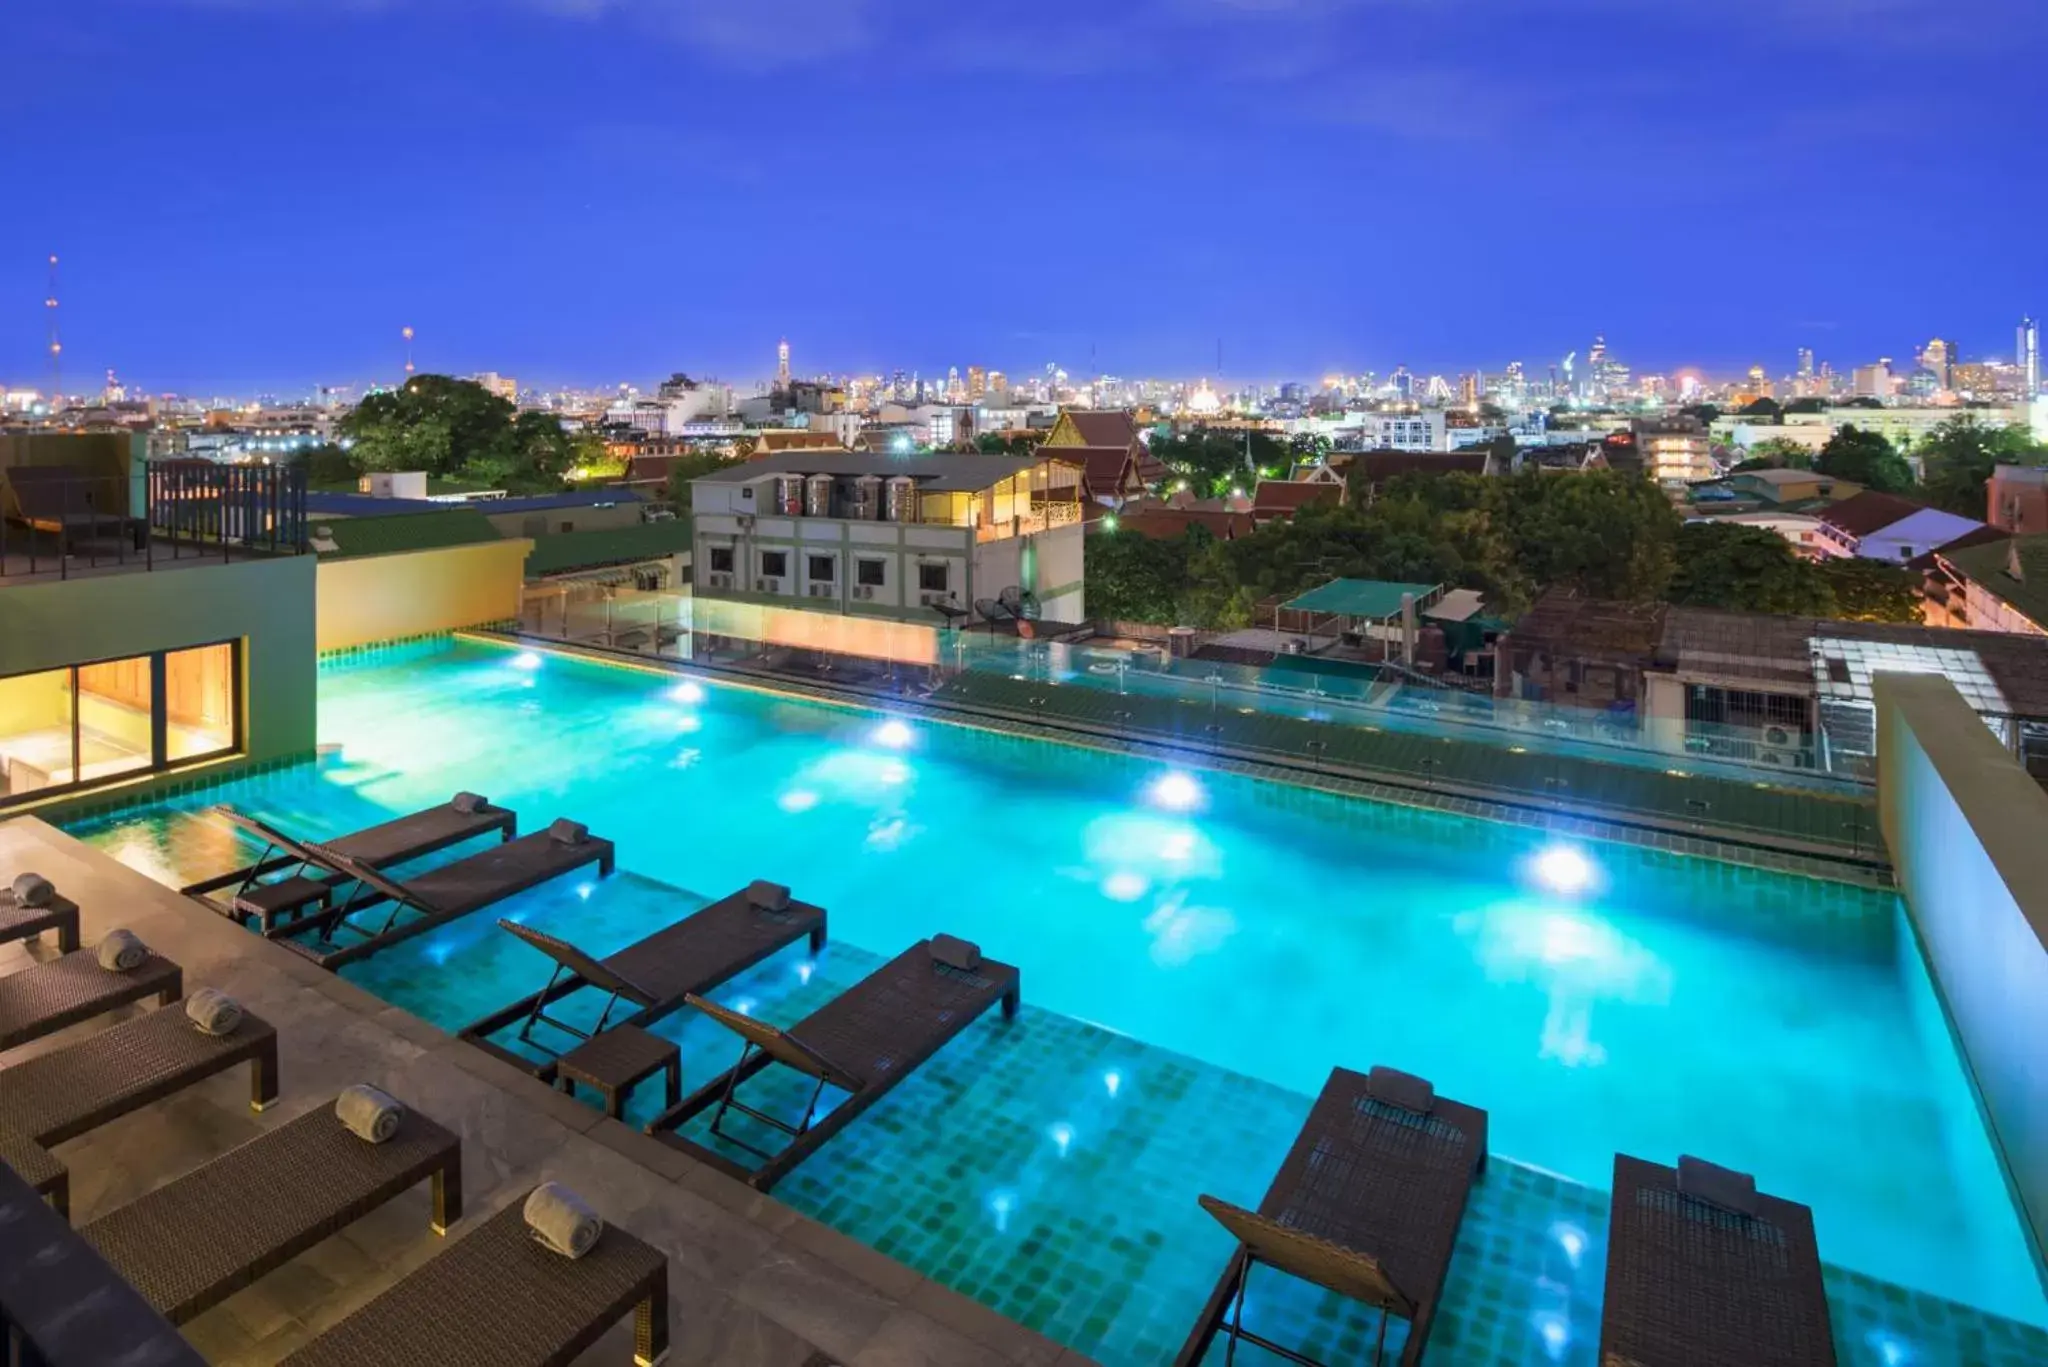 Property building, Pool View in Chillax Heritage Hotel Khaosan - SHA Extra Plus